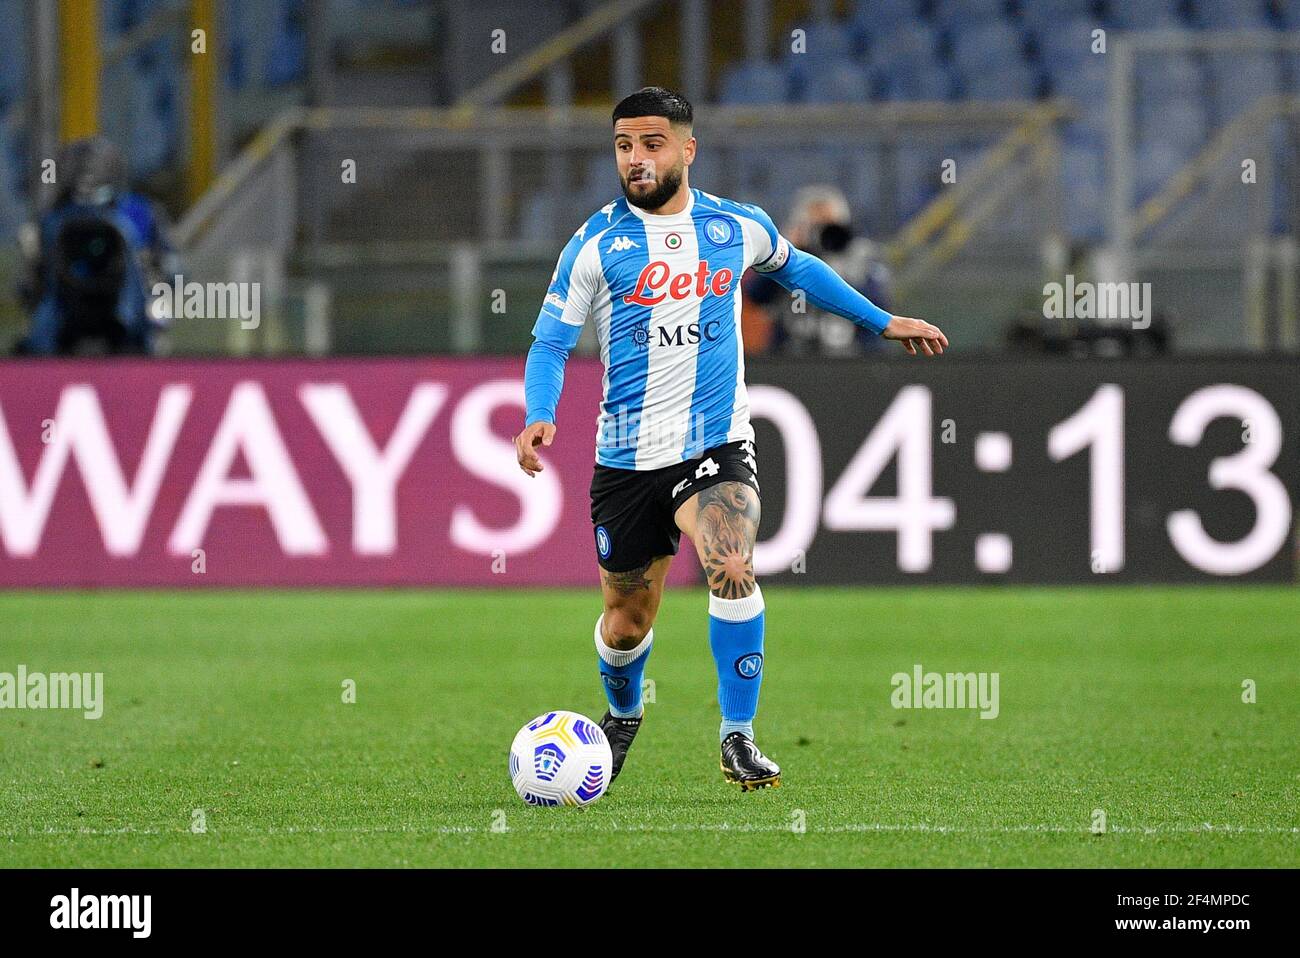 Rome, Italy. 21st Mar, 2021. Lorenzo Insigne of S.S.C. Napoli in action during the 2020-2021 Italian Serie A Championship League match between A.S. Roma and S.S.C. Napoli at Stadio Olimpico.Final score; A.S. Roma 0:2 S.S.C. Napoli. Credit: SOPA Images Limited/Alamy Live News Stock Photo